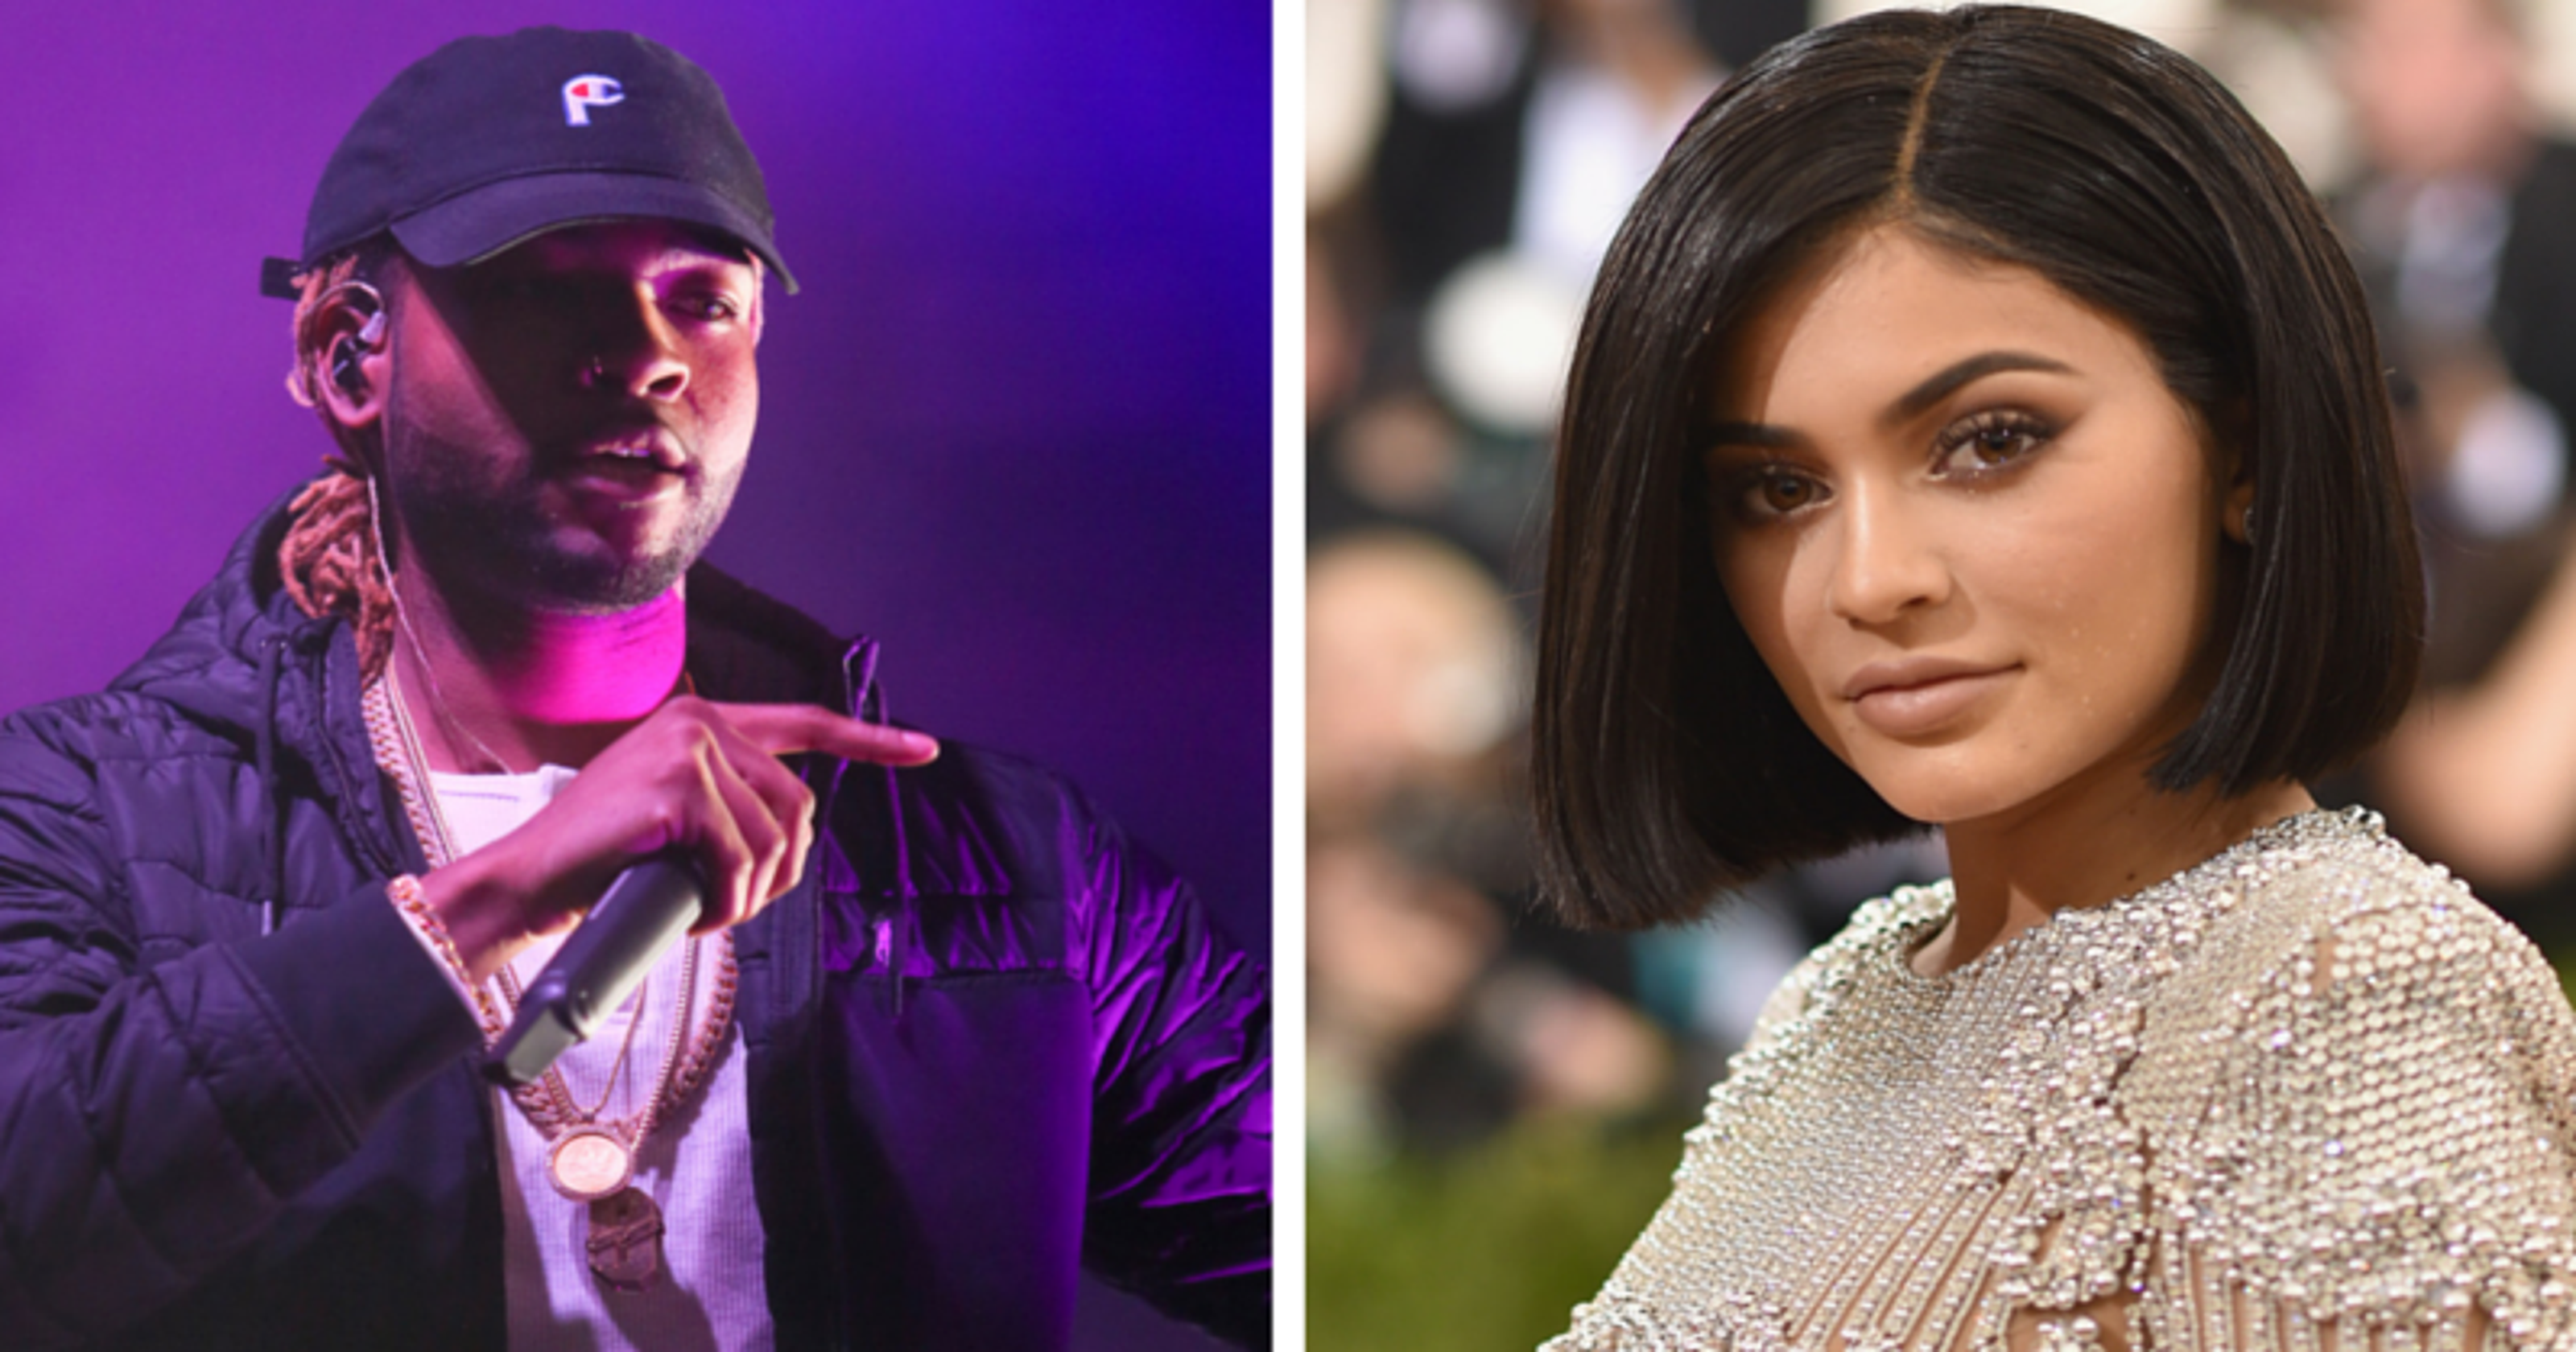 PartyNextDoor tells Kylie Jenner to 'Come and See Me' in sultry new video